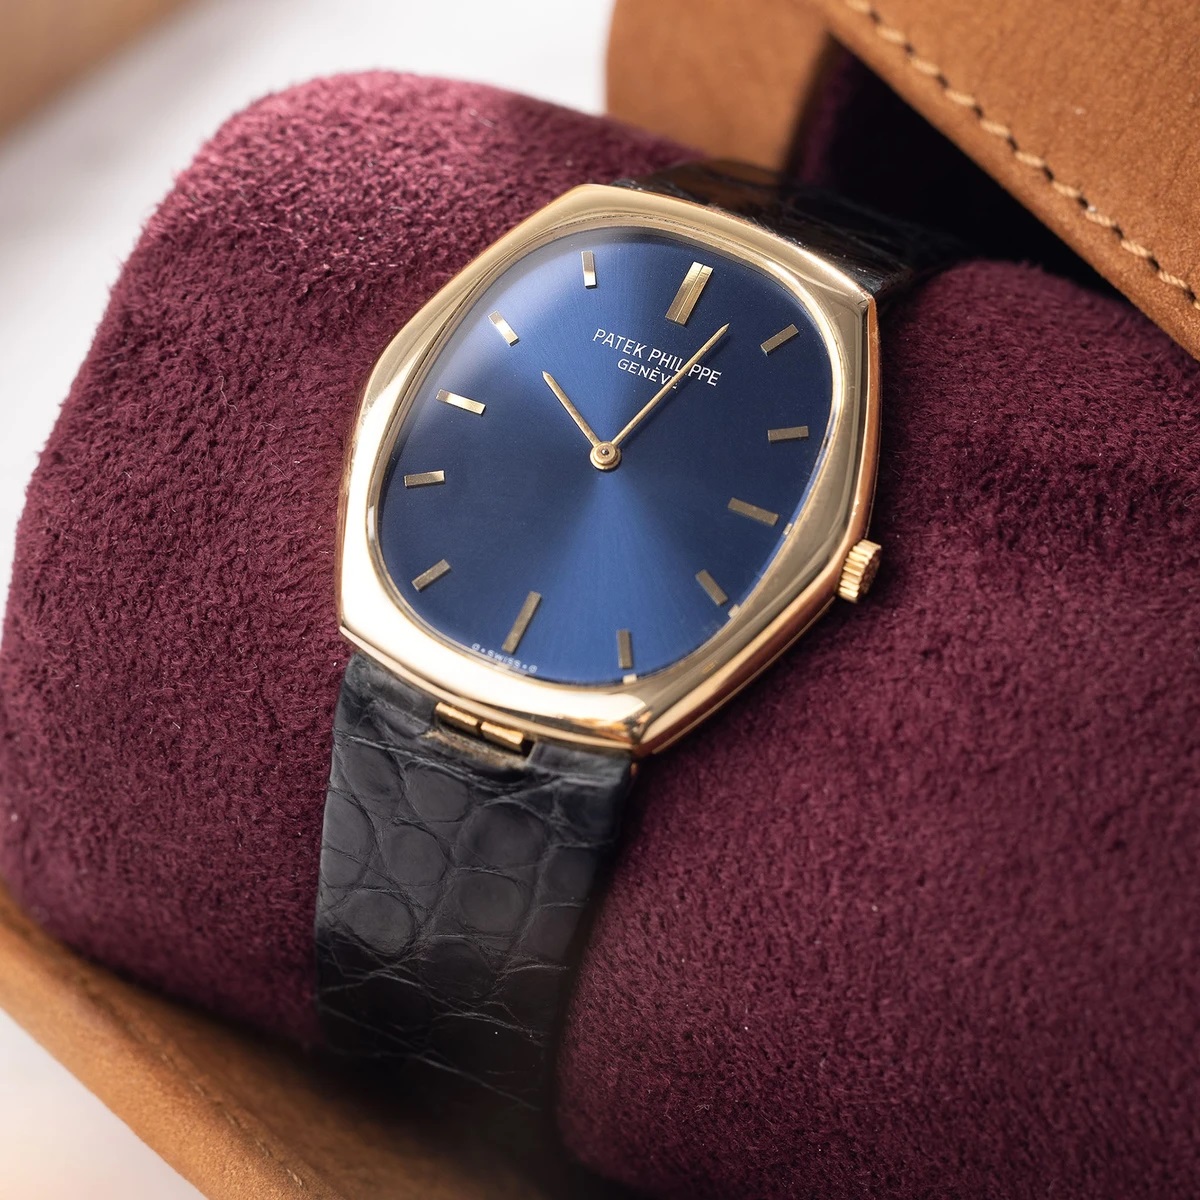 The UK 1:1 Fake Patek Philippe Golden Ellipse ref. 3858 is not your average classy dress watch